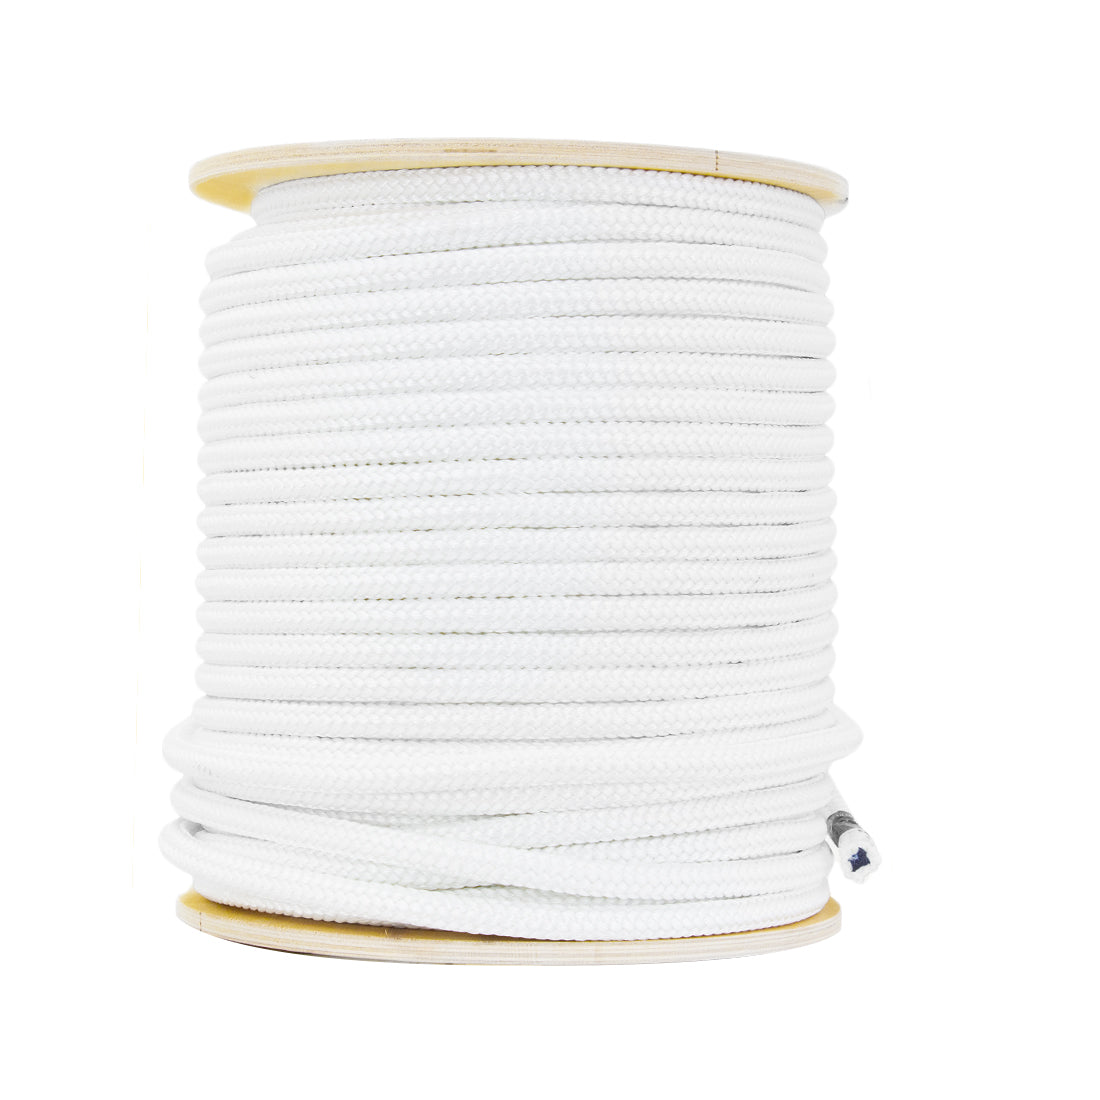 New England Rope Braided Safety Core 1/2 Inch - 300 Foot Full View